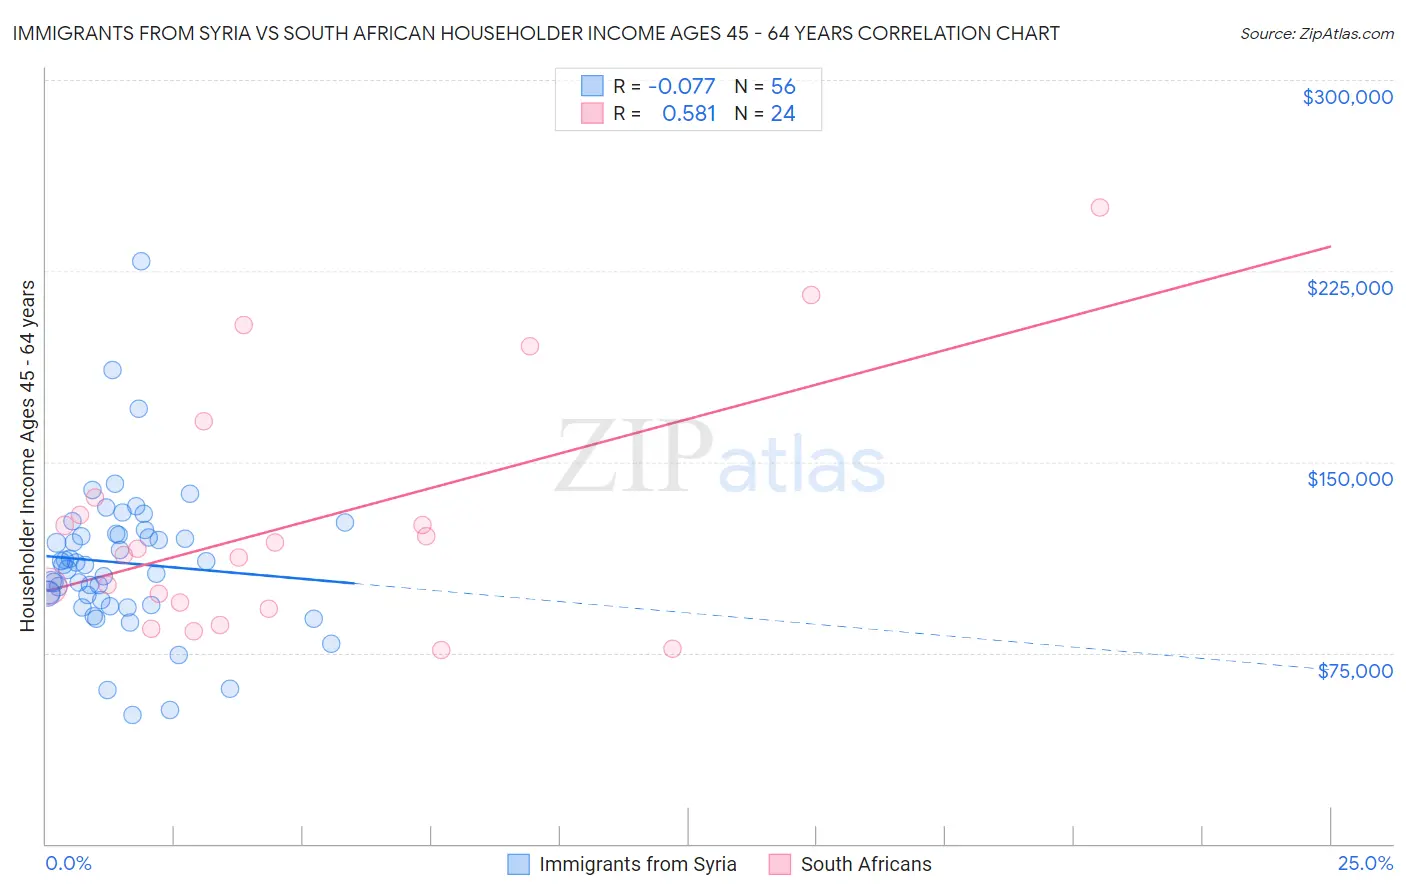 Immigrants from Syria vs South African Householder Income Ages 45 - 64 years